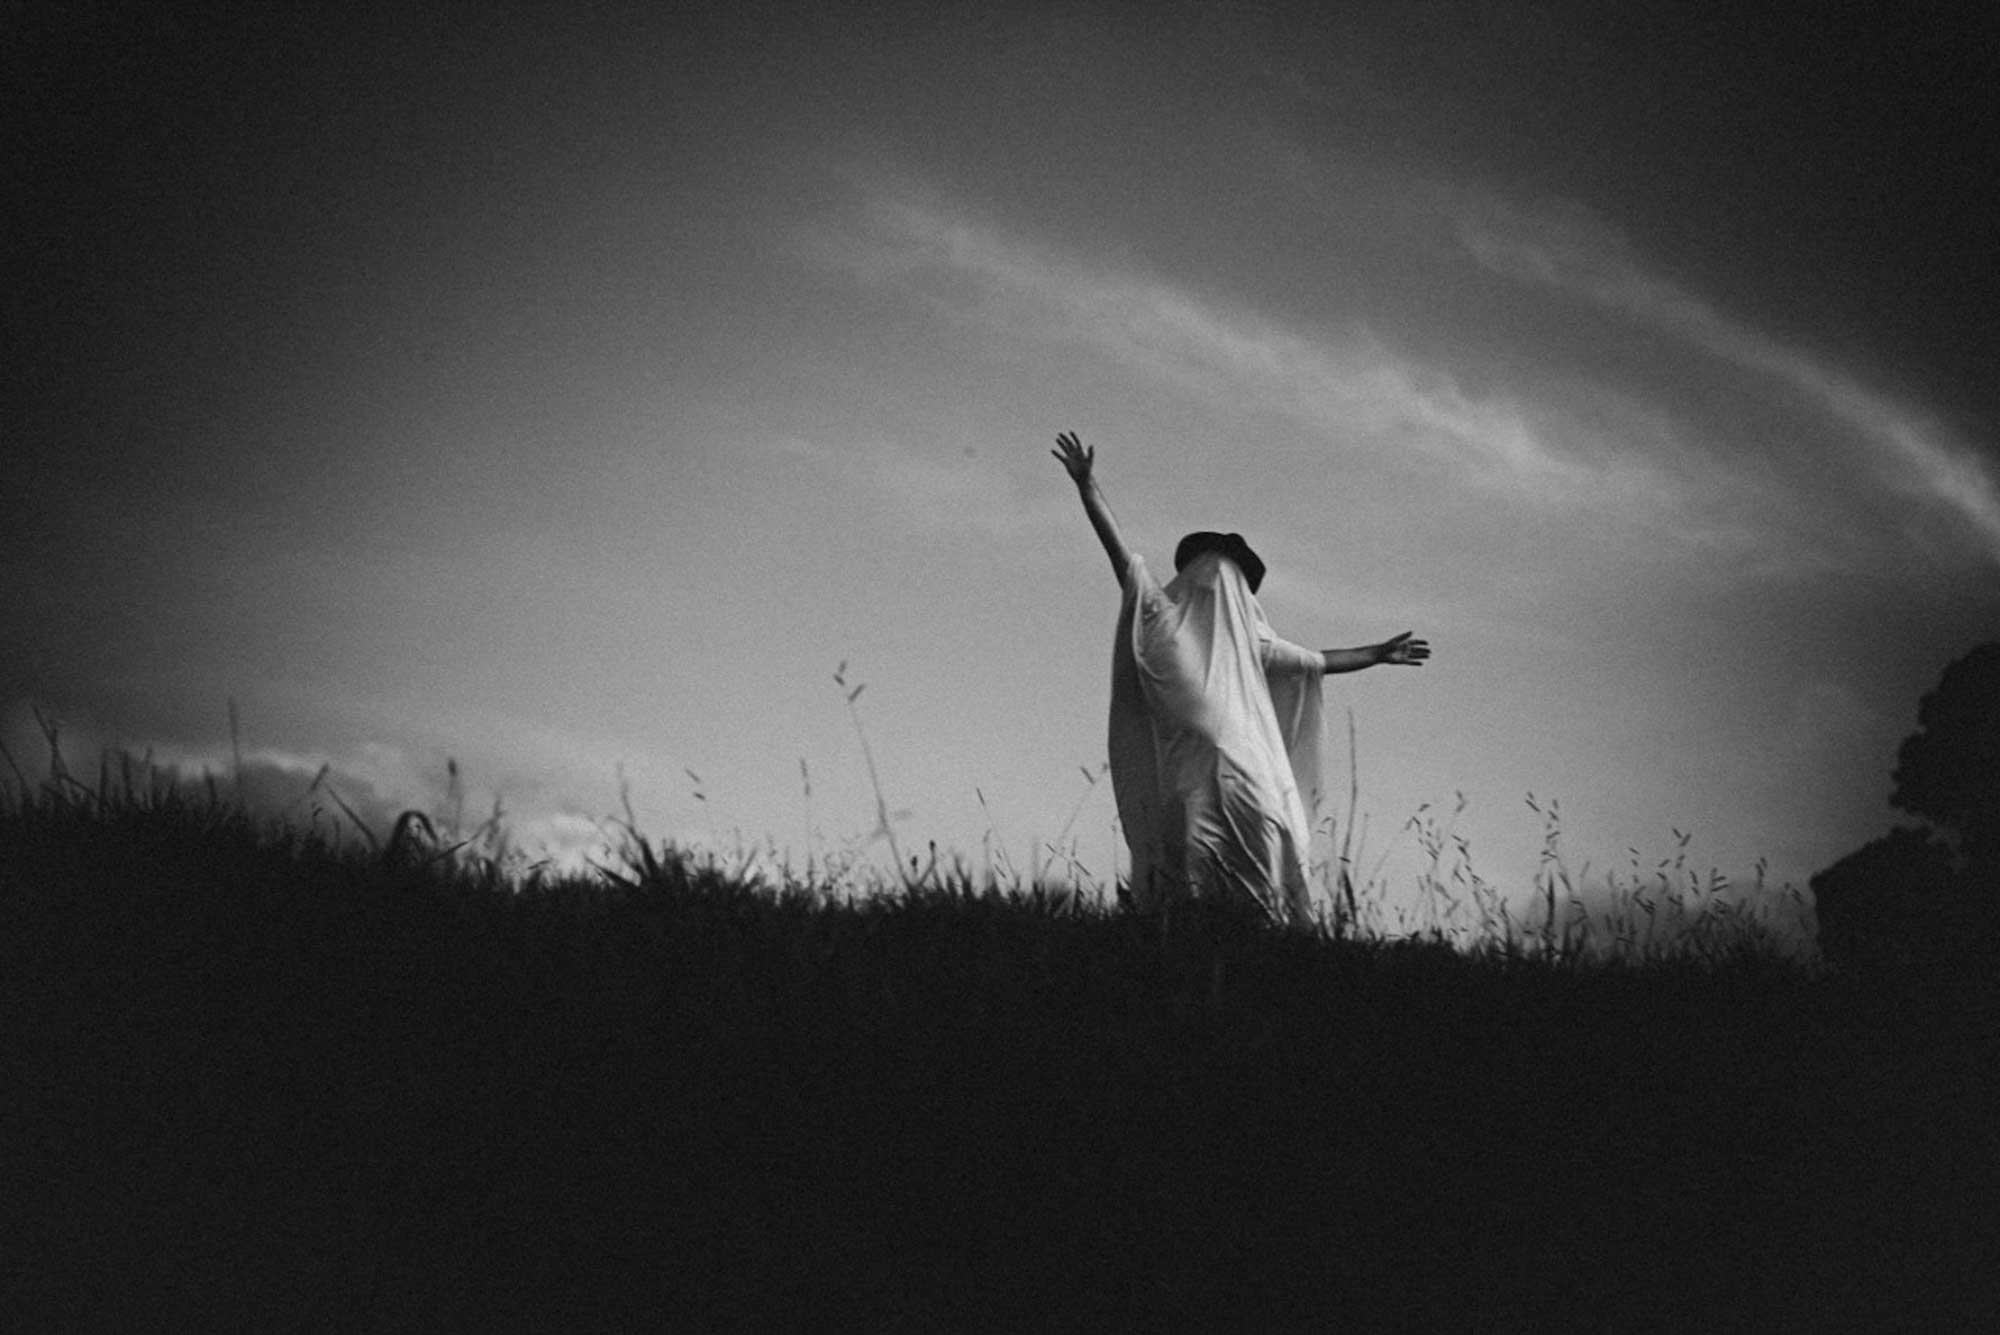 Free-spirited woman in a ghost costume, joyfully embracing the freedom of an open meadow